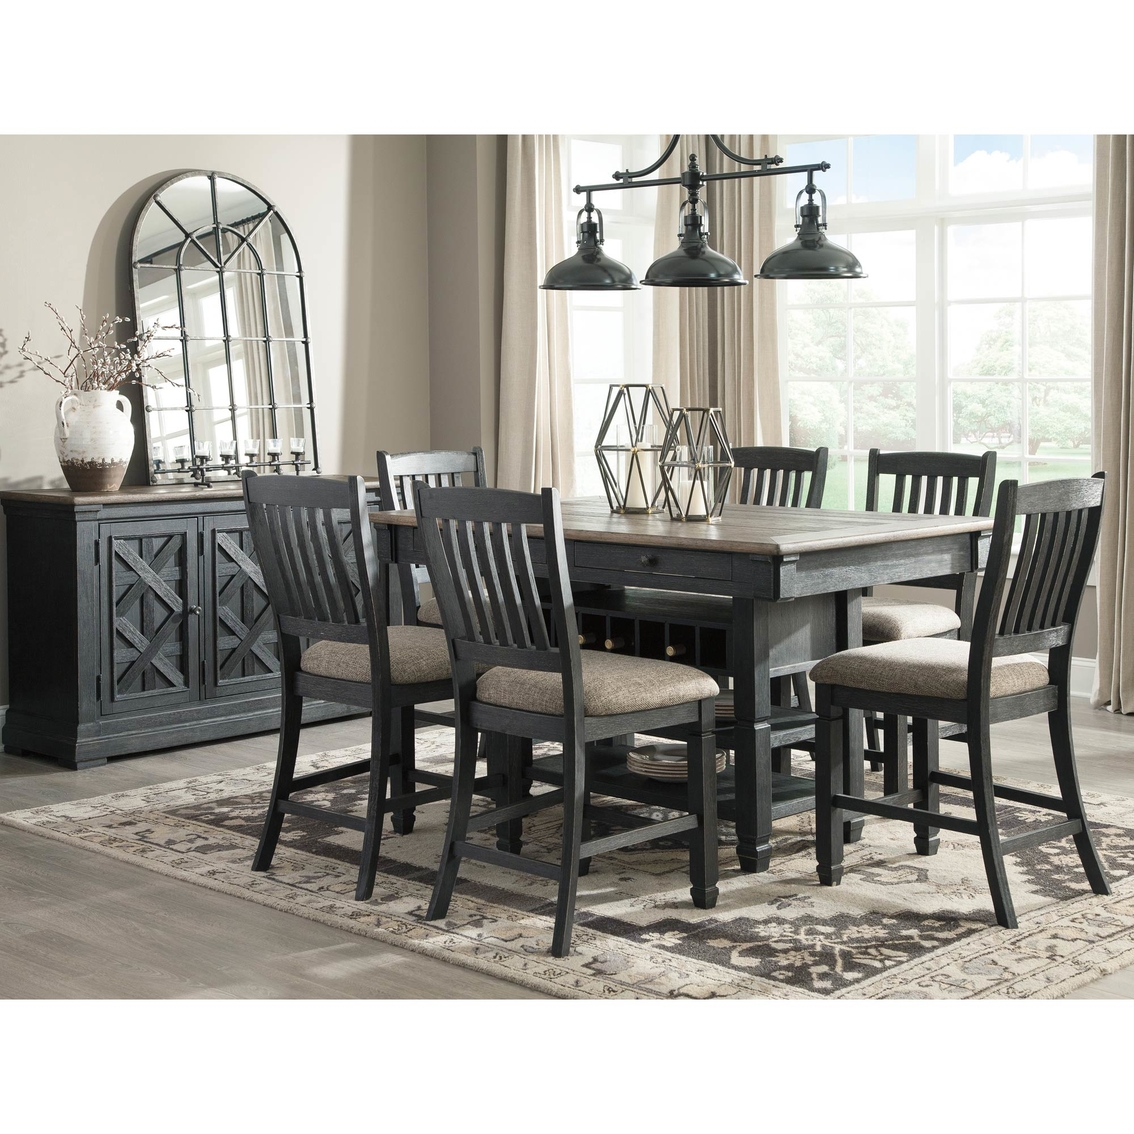 Signature Design by Ashley Tyler Creek 7 Pc. Counter Height Dining Table Set - Image 3 of 3